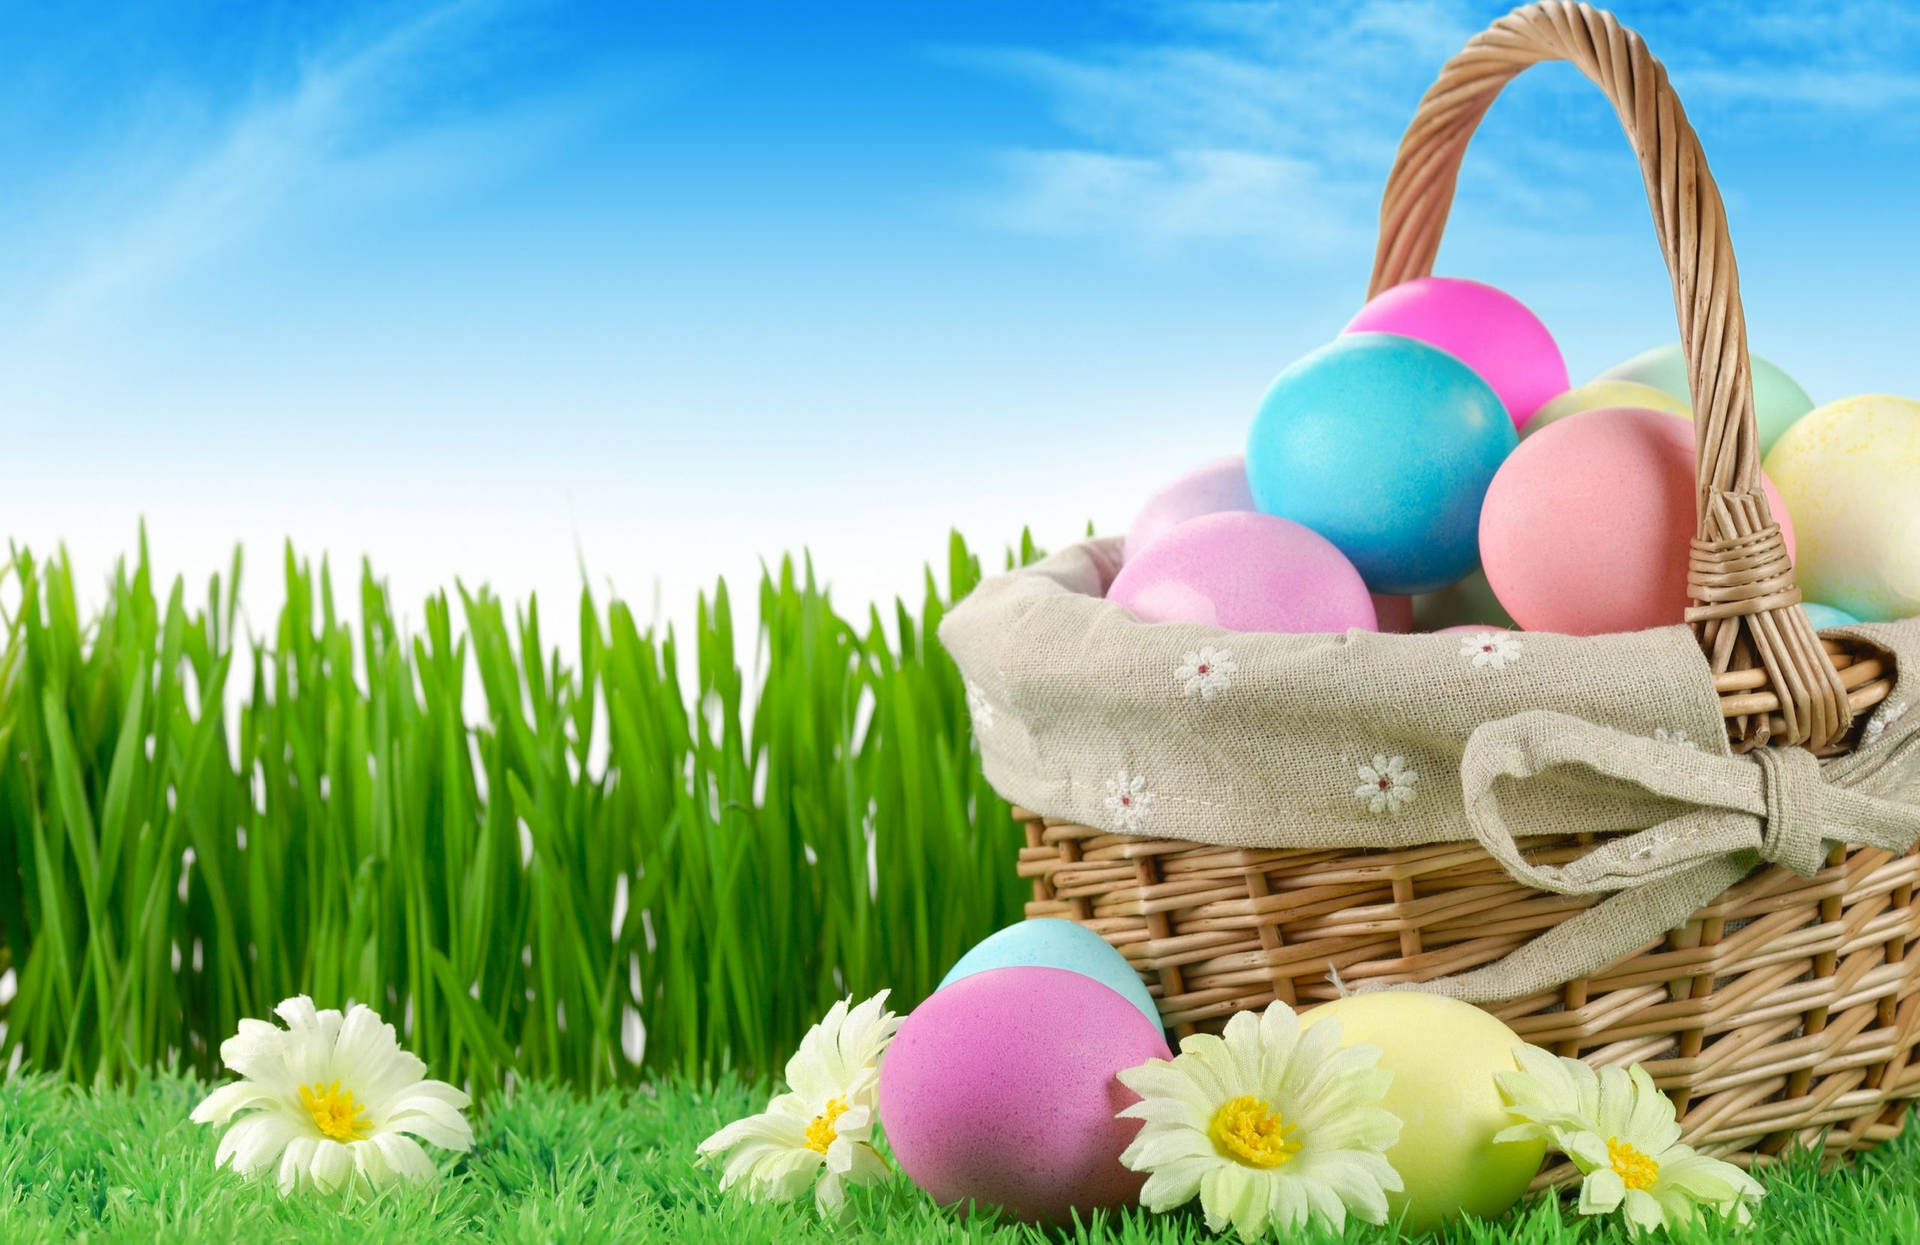 Happy Easter Eggs Basket On Sunny Day Background